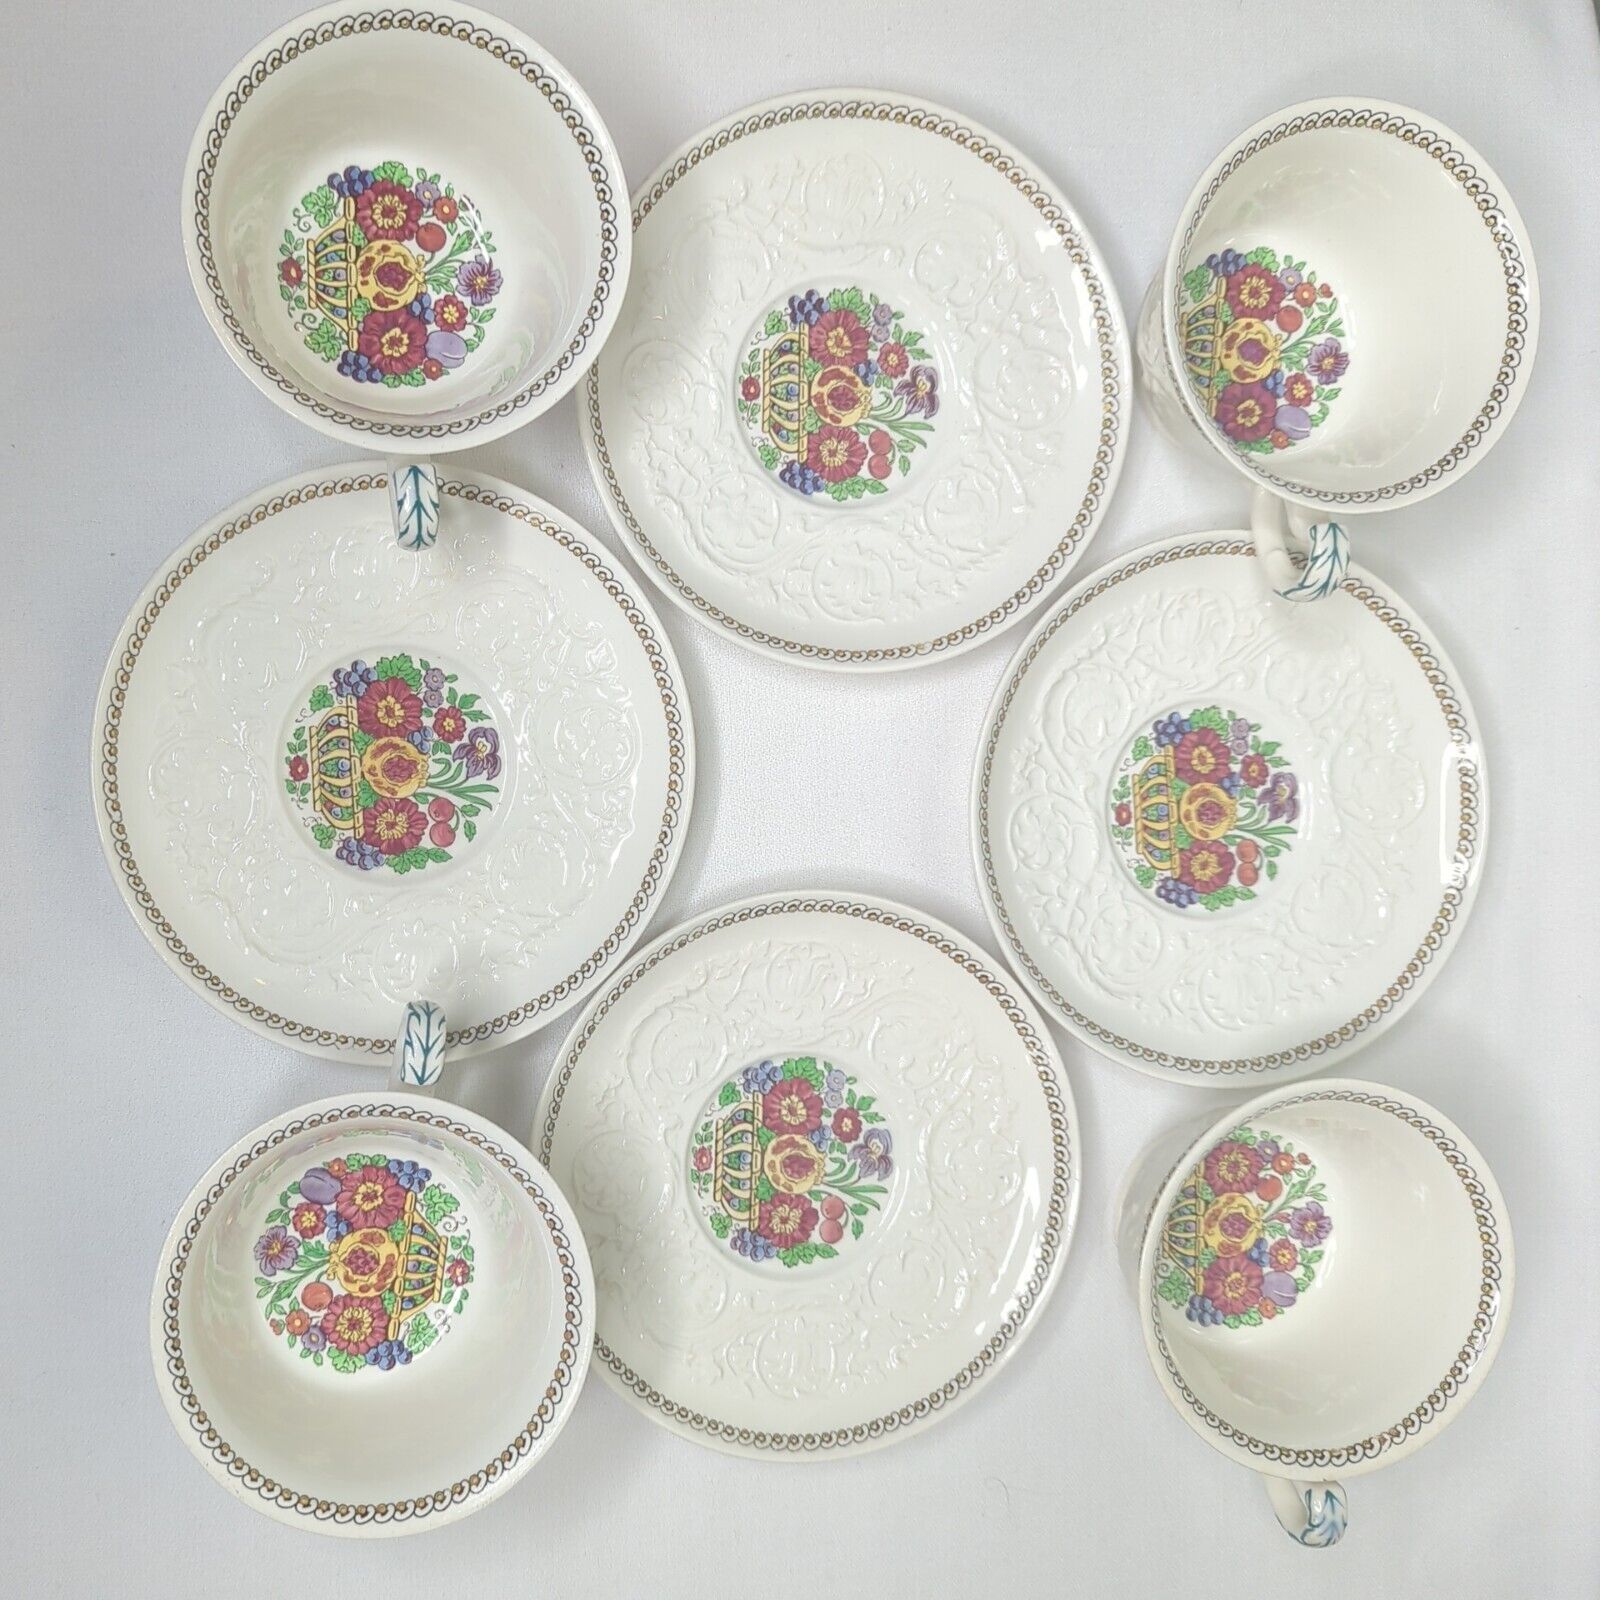 Wedgwood Patrician Windermere Cups and Saucers Set of 4 England Floral Motif 